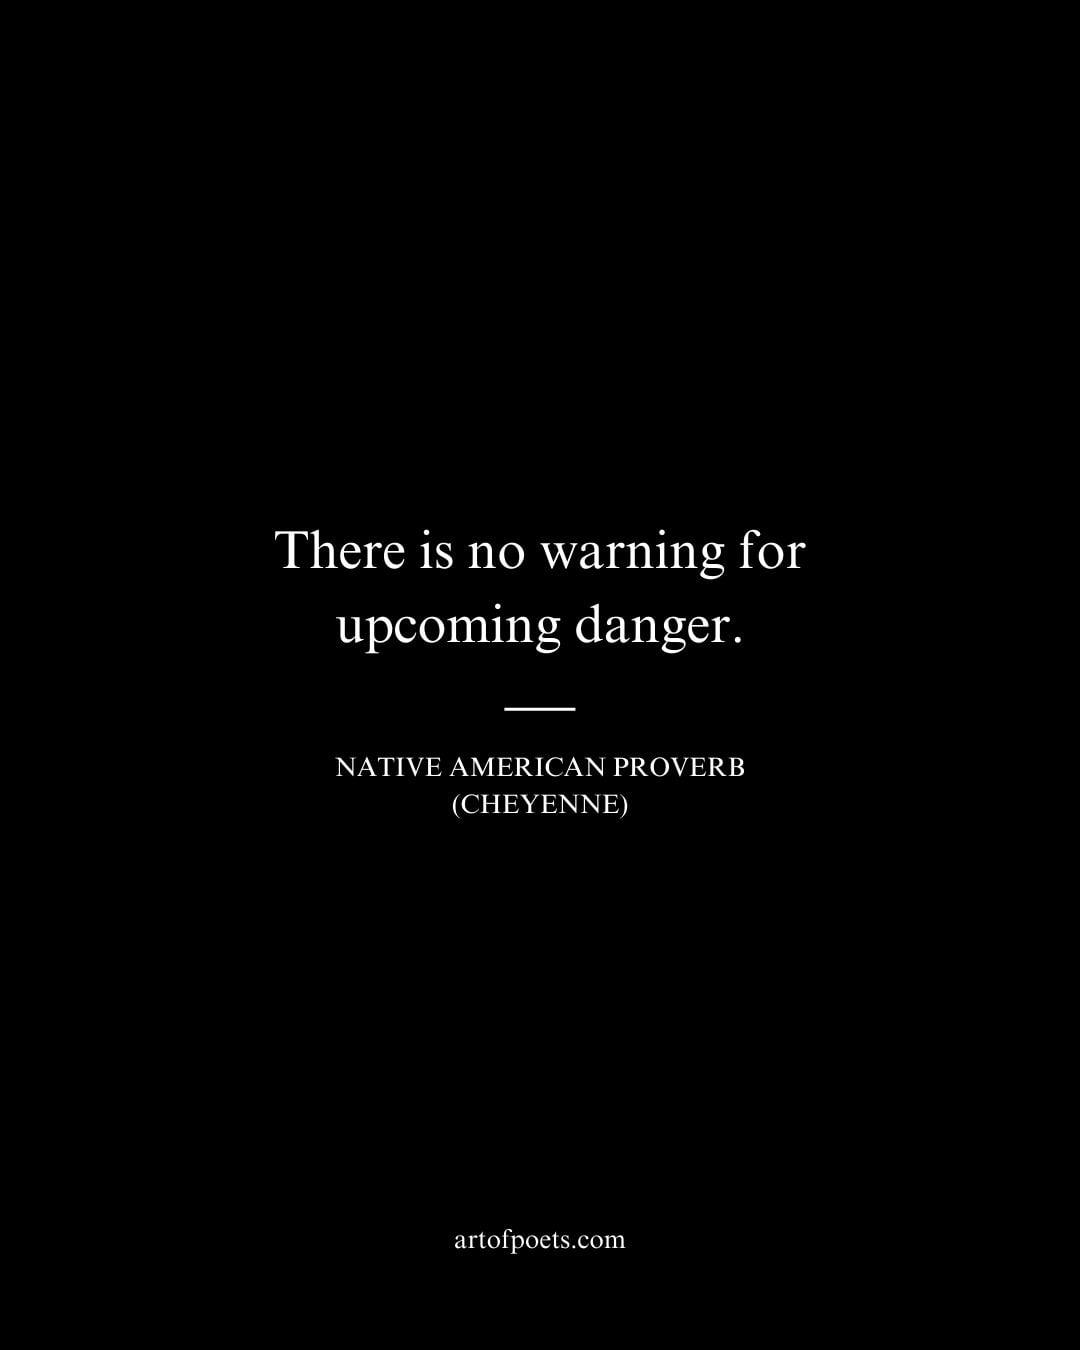 There is no warning for upcoming danger